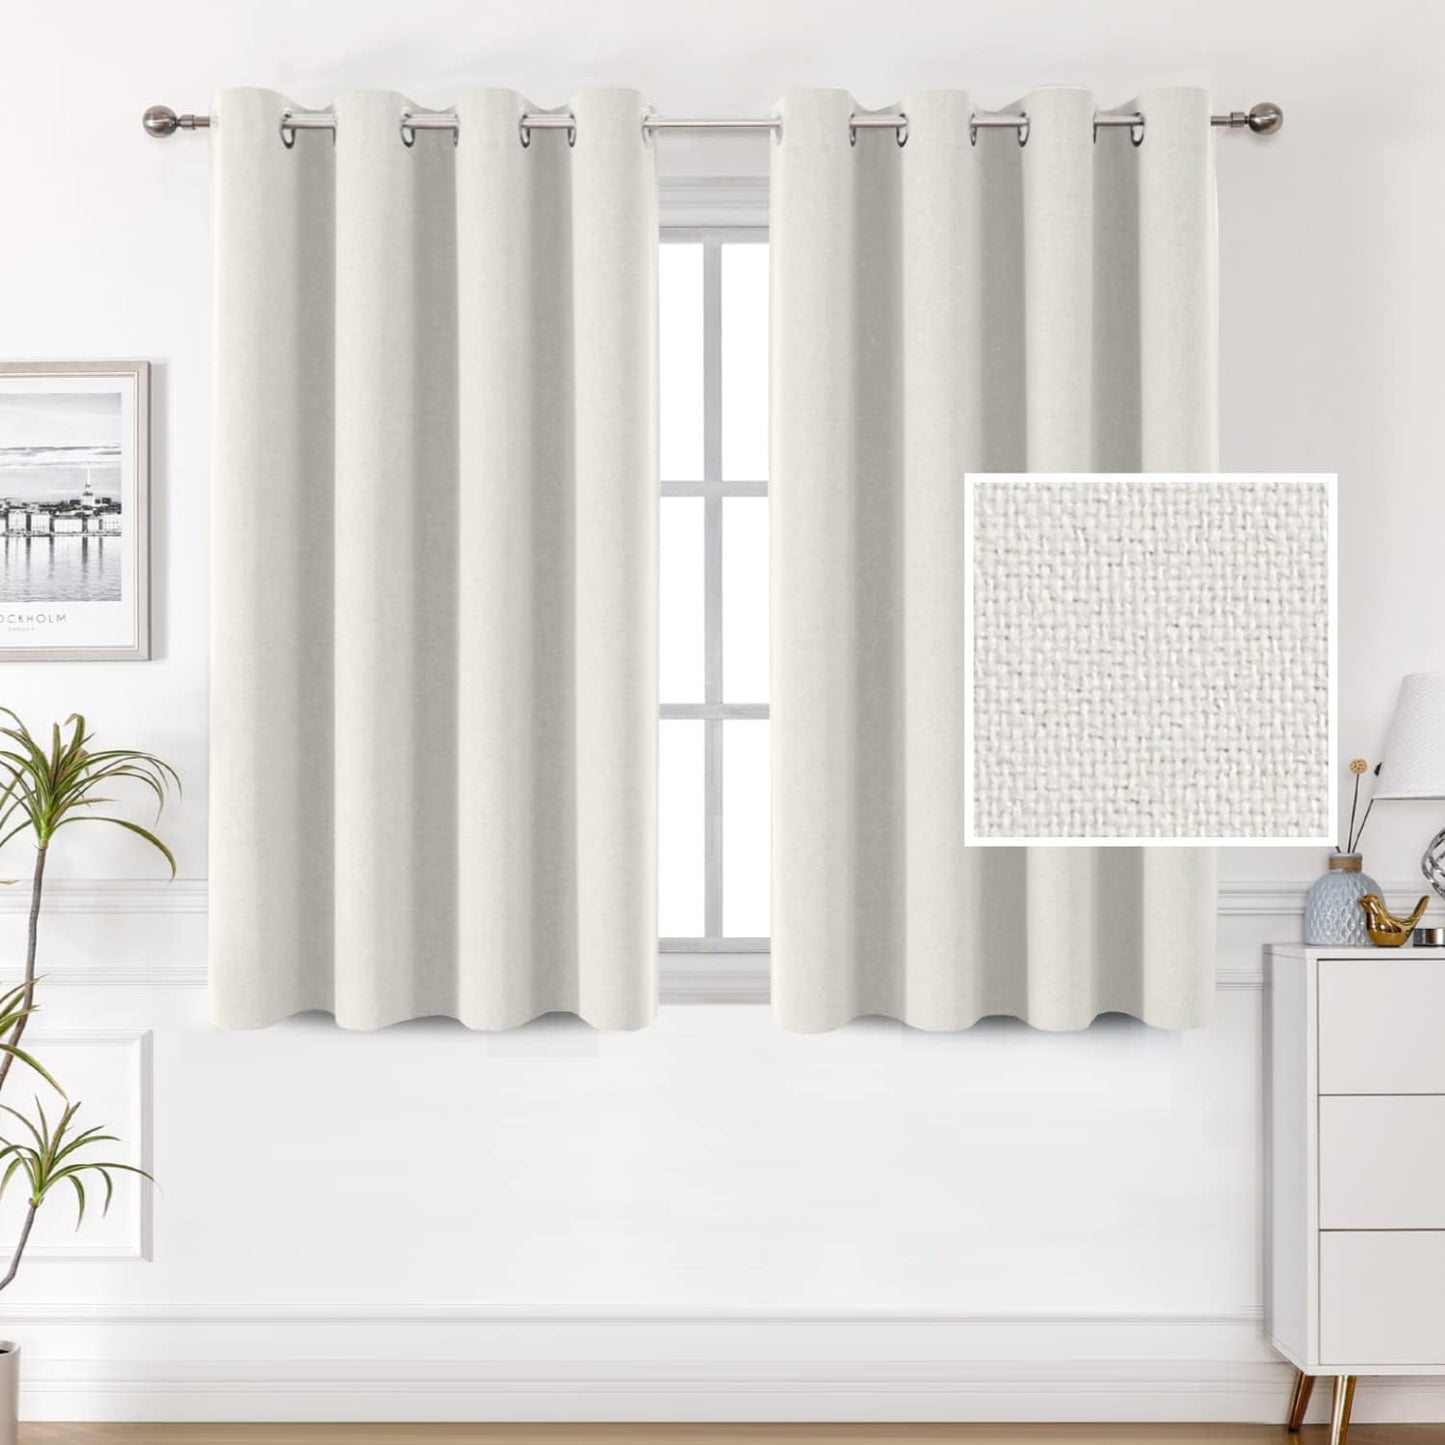 H.VERSAILTEX 100% Blackout Linen Look Curtains Thermal Insulated Curtains for Living Room Textured Burlap Drapes for Bedroom Grommet Linen Noise Blocking Curtains 42 X 84 Inch, 2 Panels - Sage  H.VERSAILTEX Off White 52"W X 45"L 